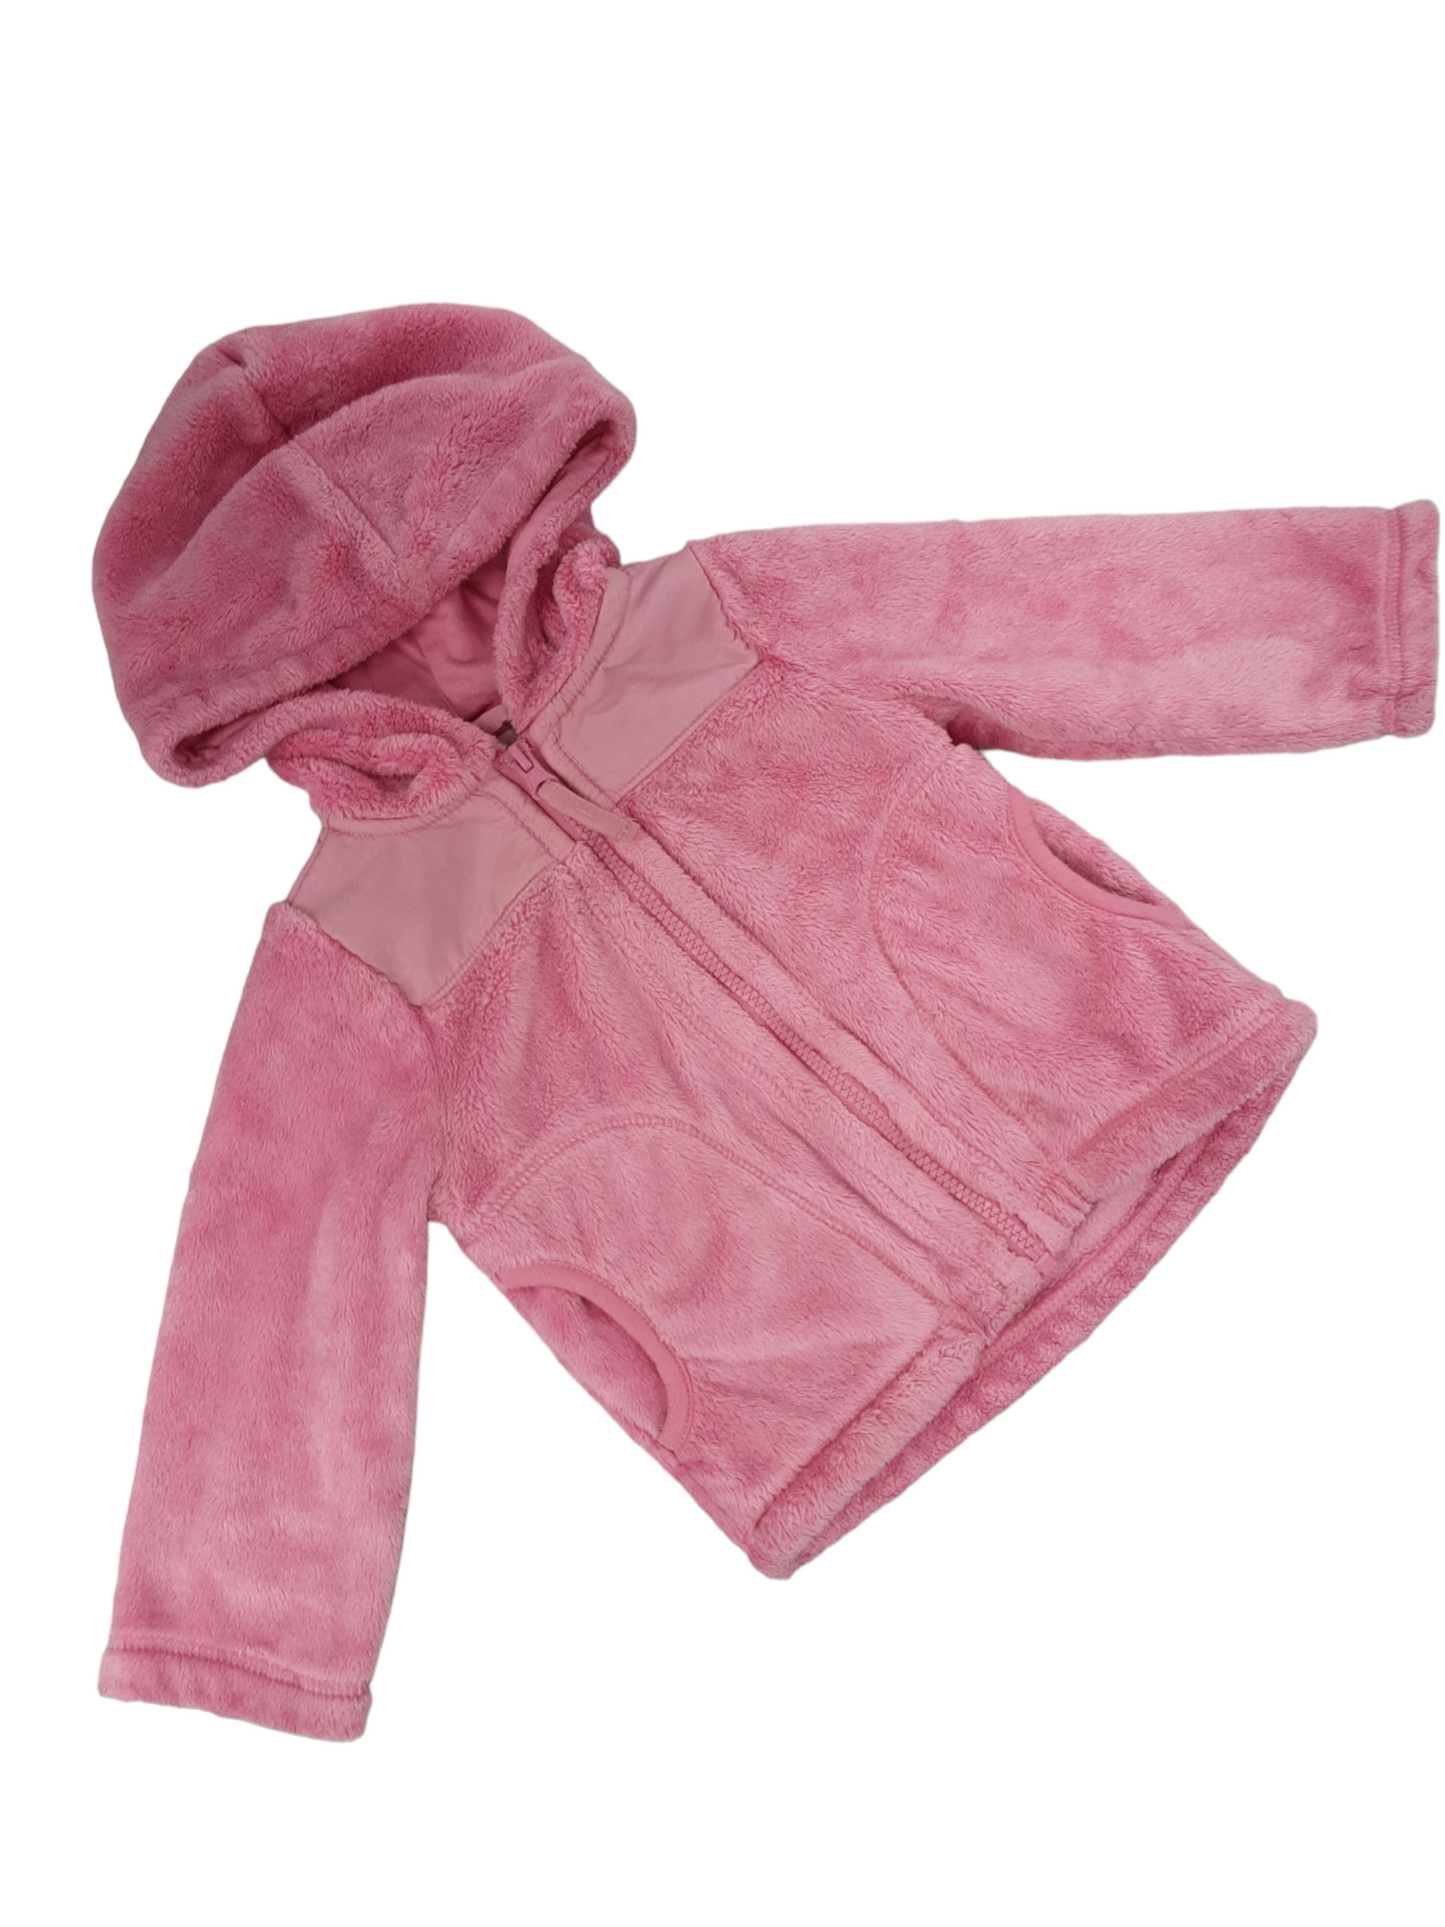 Plush pink zip up size 18 to 24 months